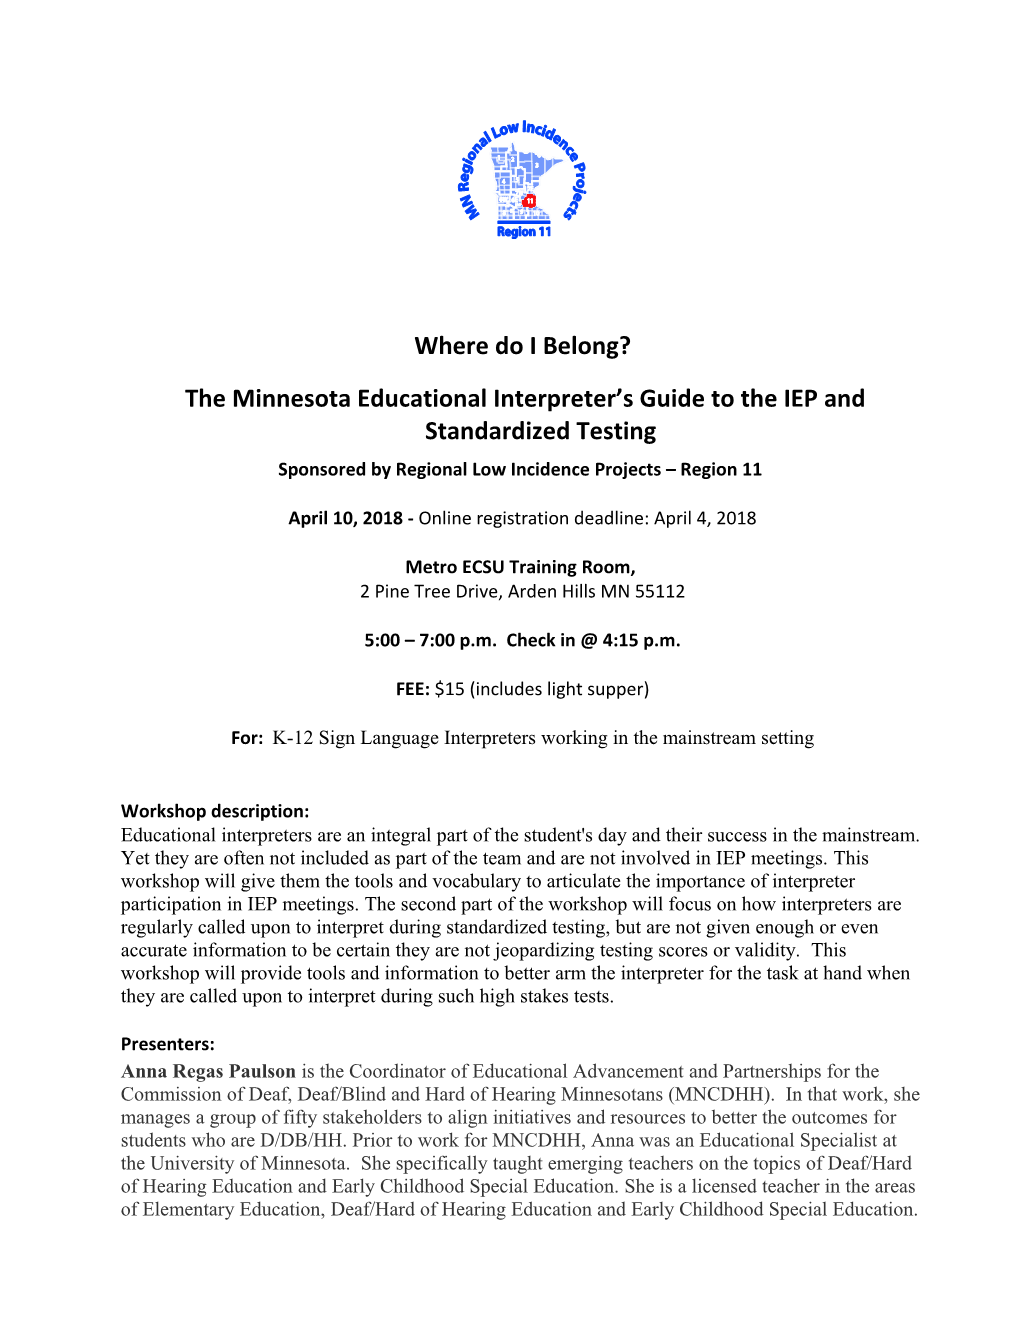 The Minnesota Educational Interpreter S Guide to the IEP and Standardized Testing